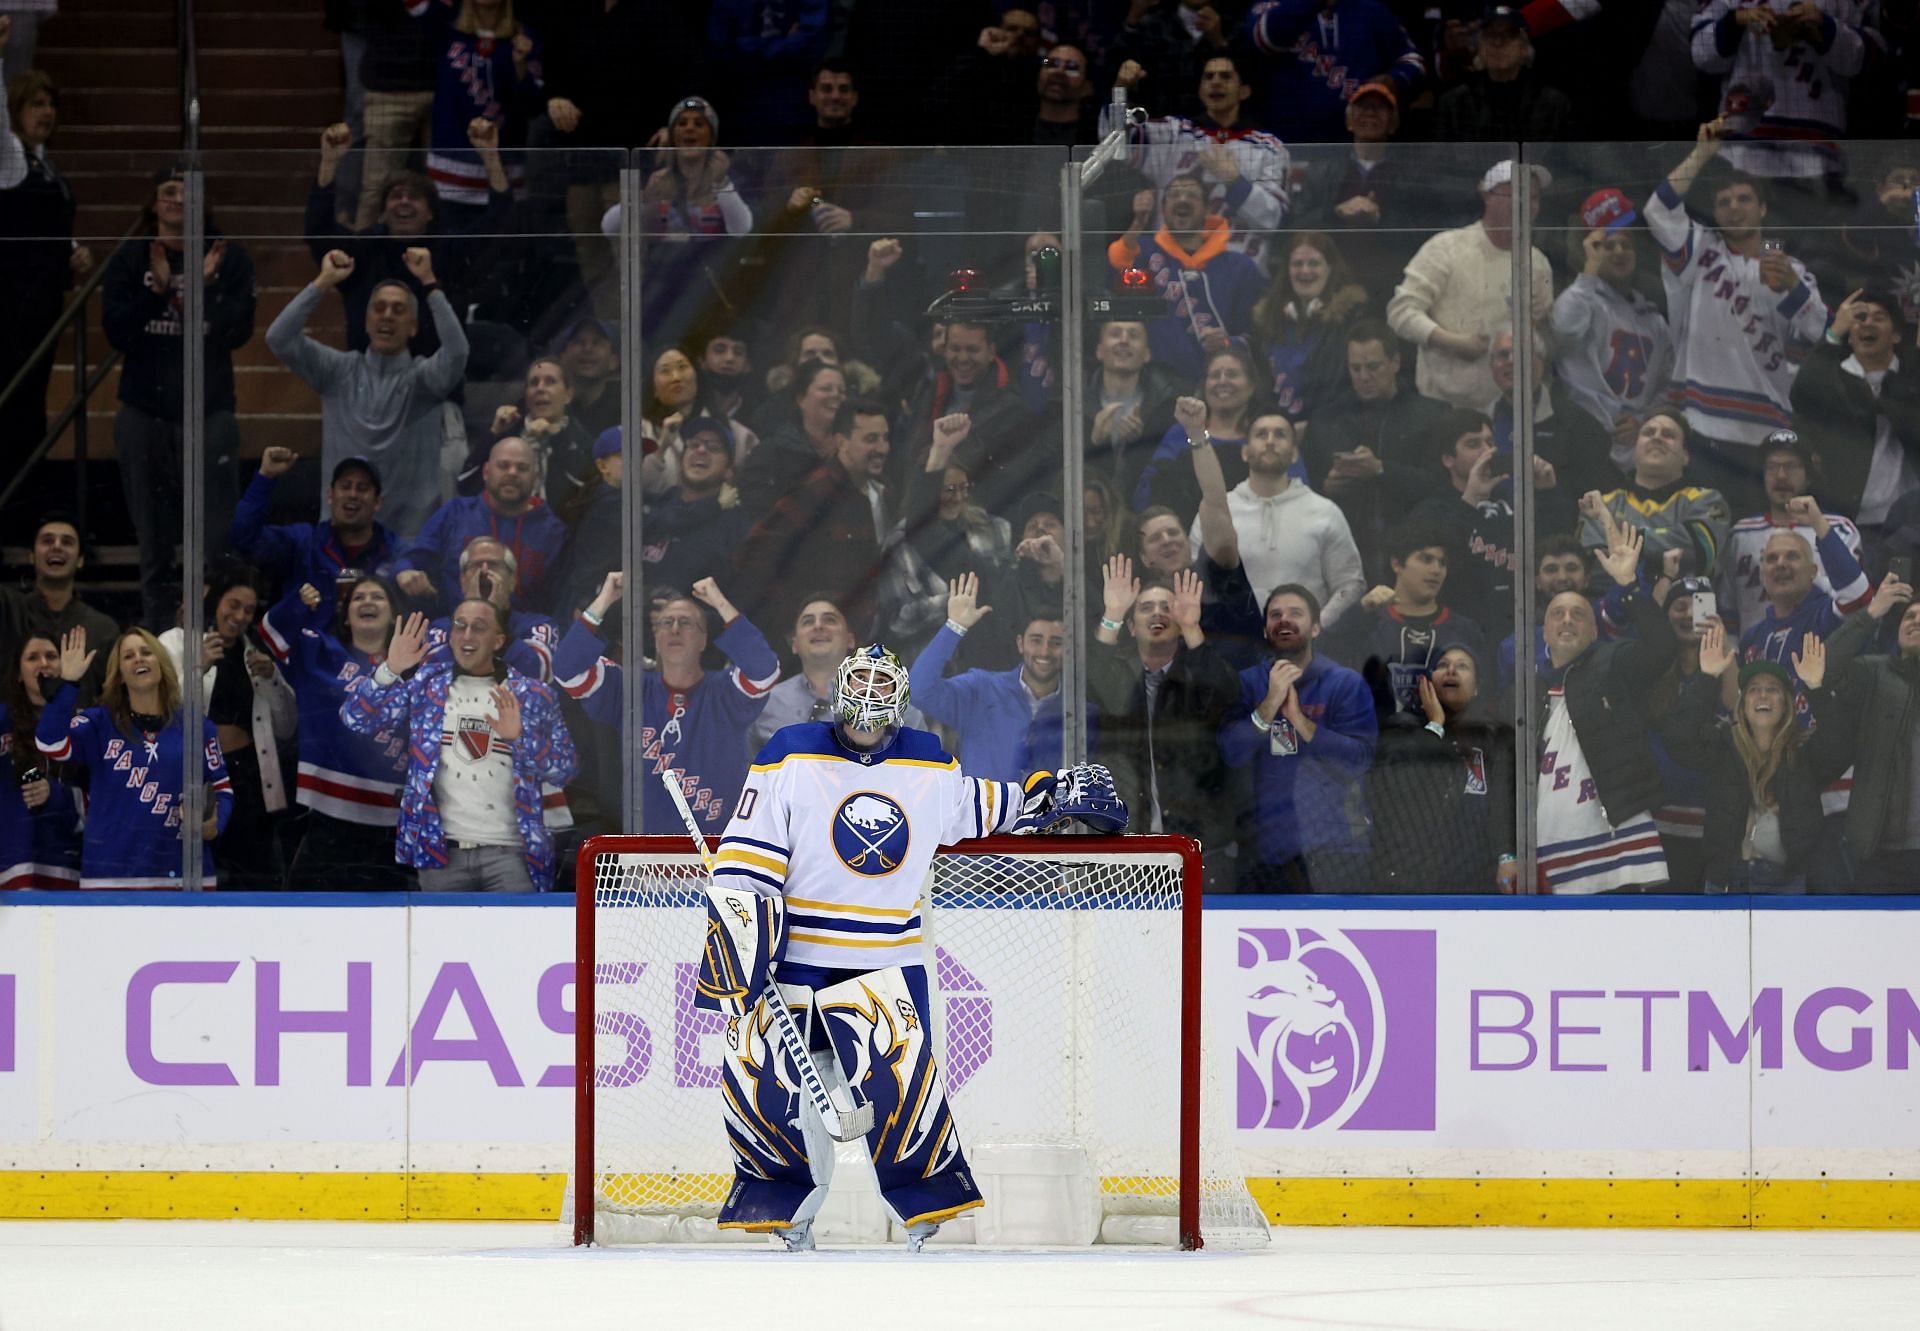 New York Rangers vs Buffalo Sabres How and where to watch NHL live streaming on TV, channel list, and more